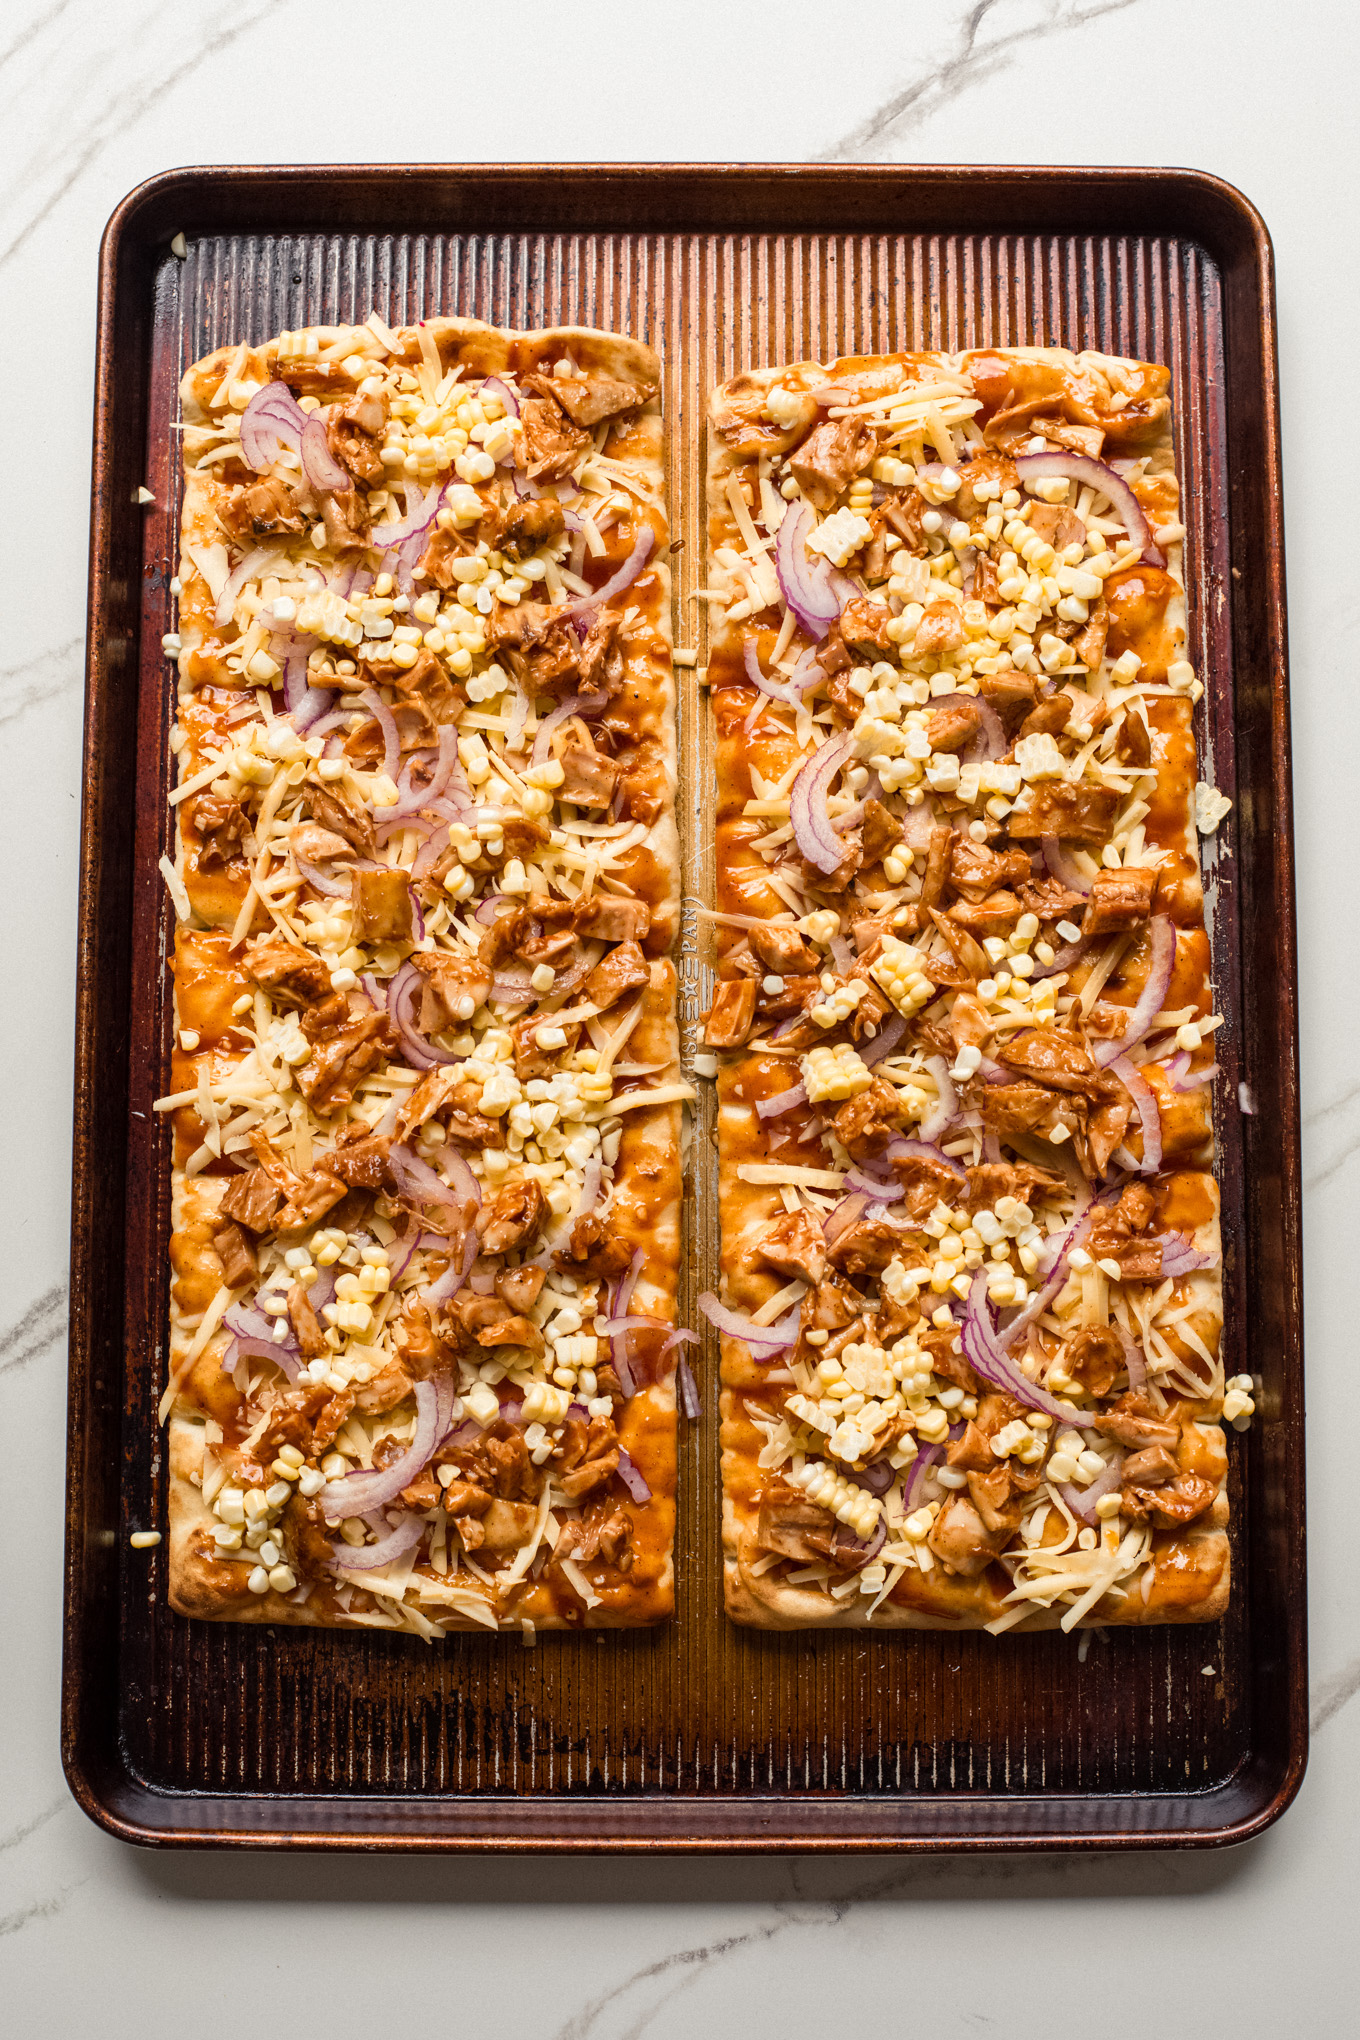 flatbread topped with chicken and cheese.